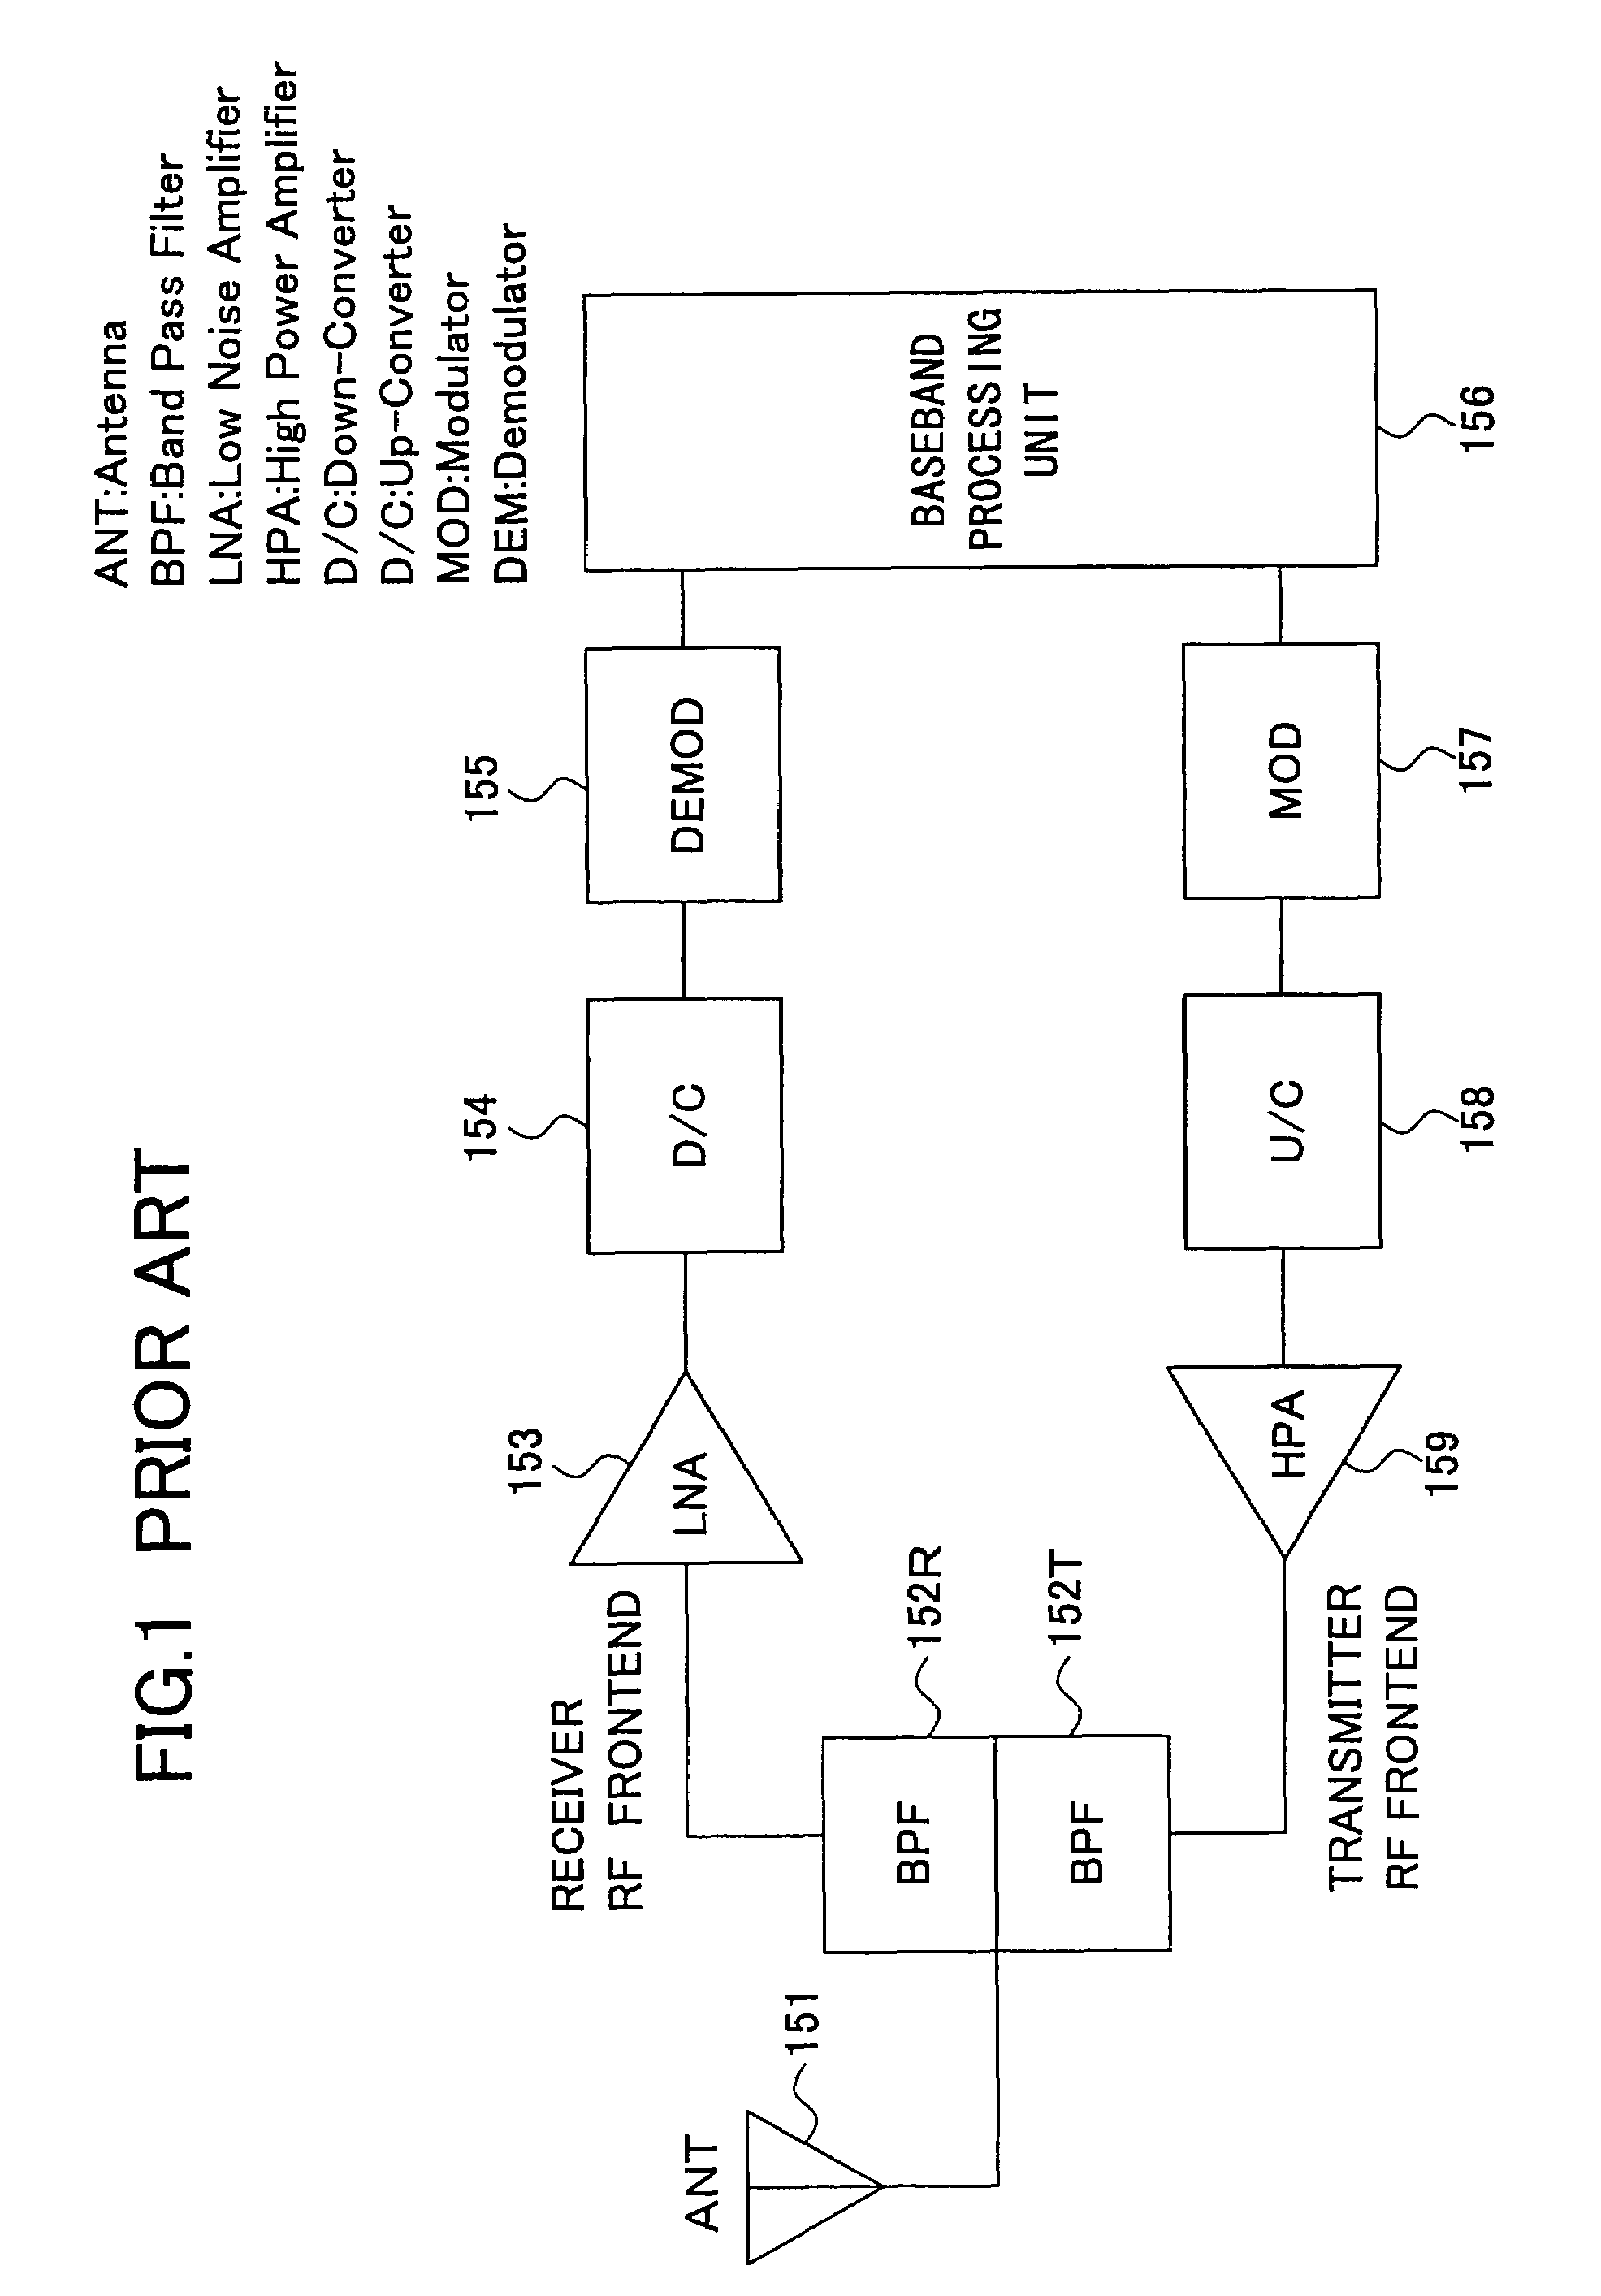 Superconducting tunable filter having a patch resonator pattern tuned by a variable dielectric constant top plate